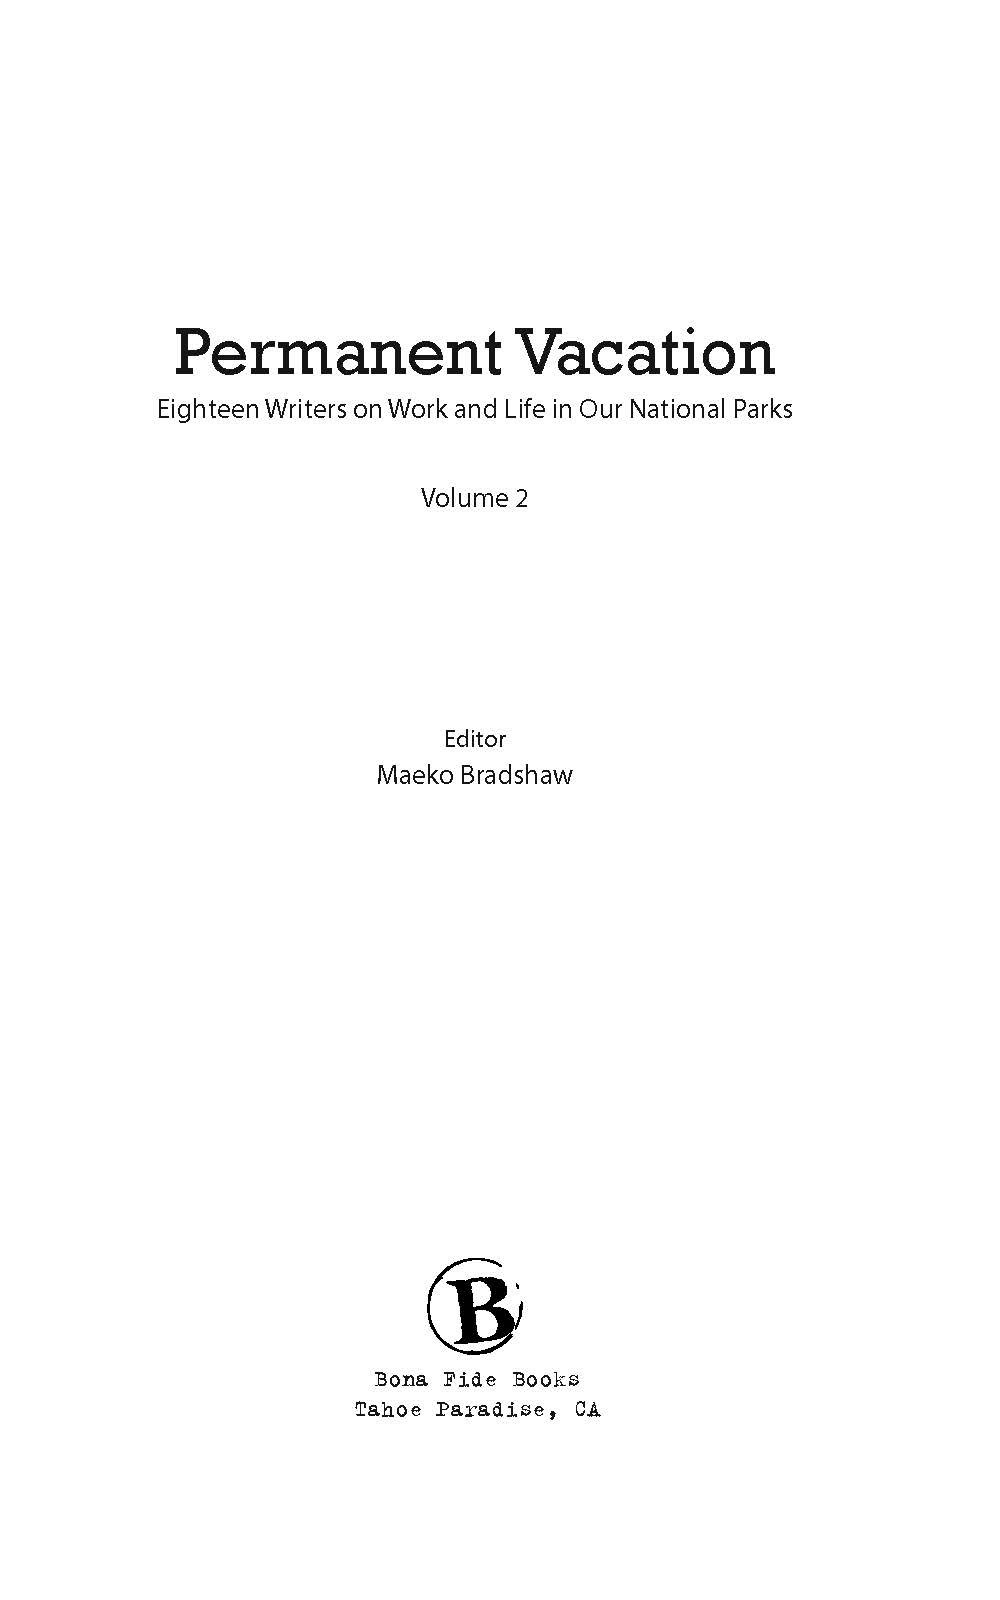 Portfolio example from Permanent Vacation II_Page_1.jpg